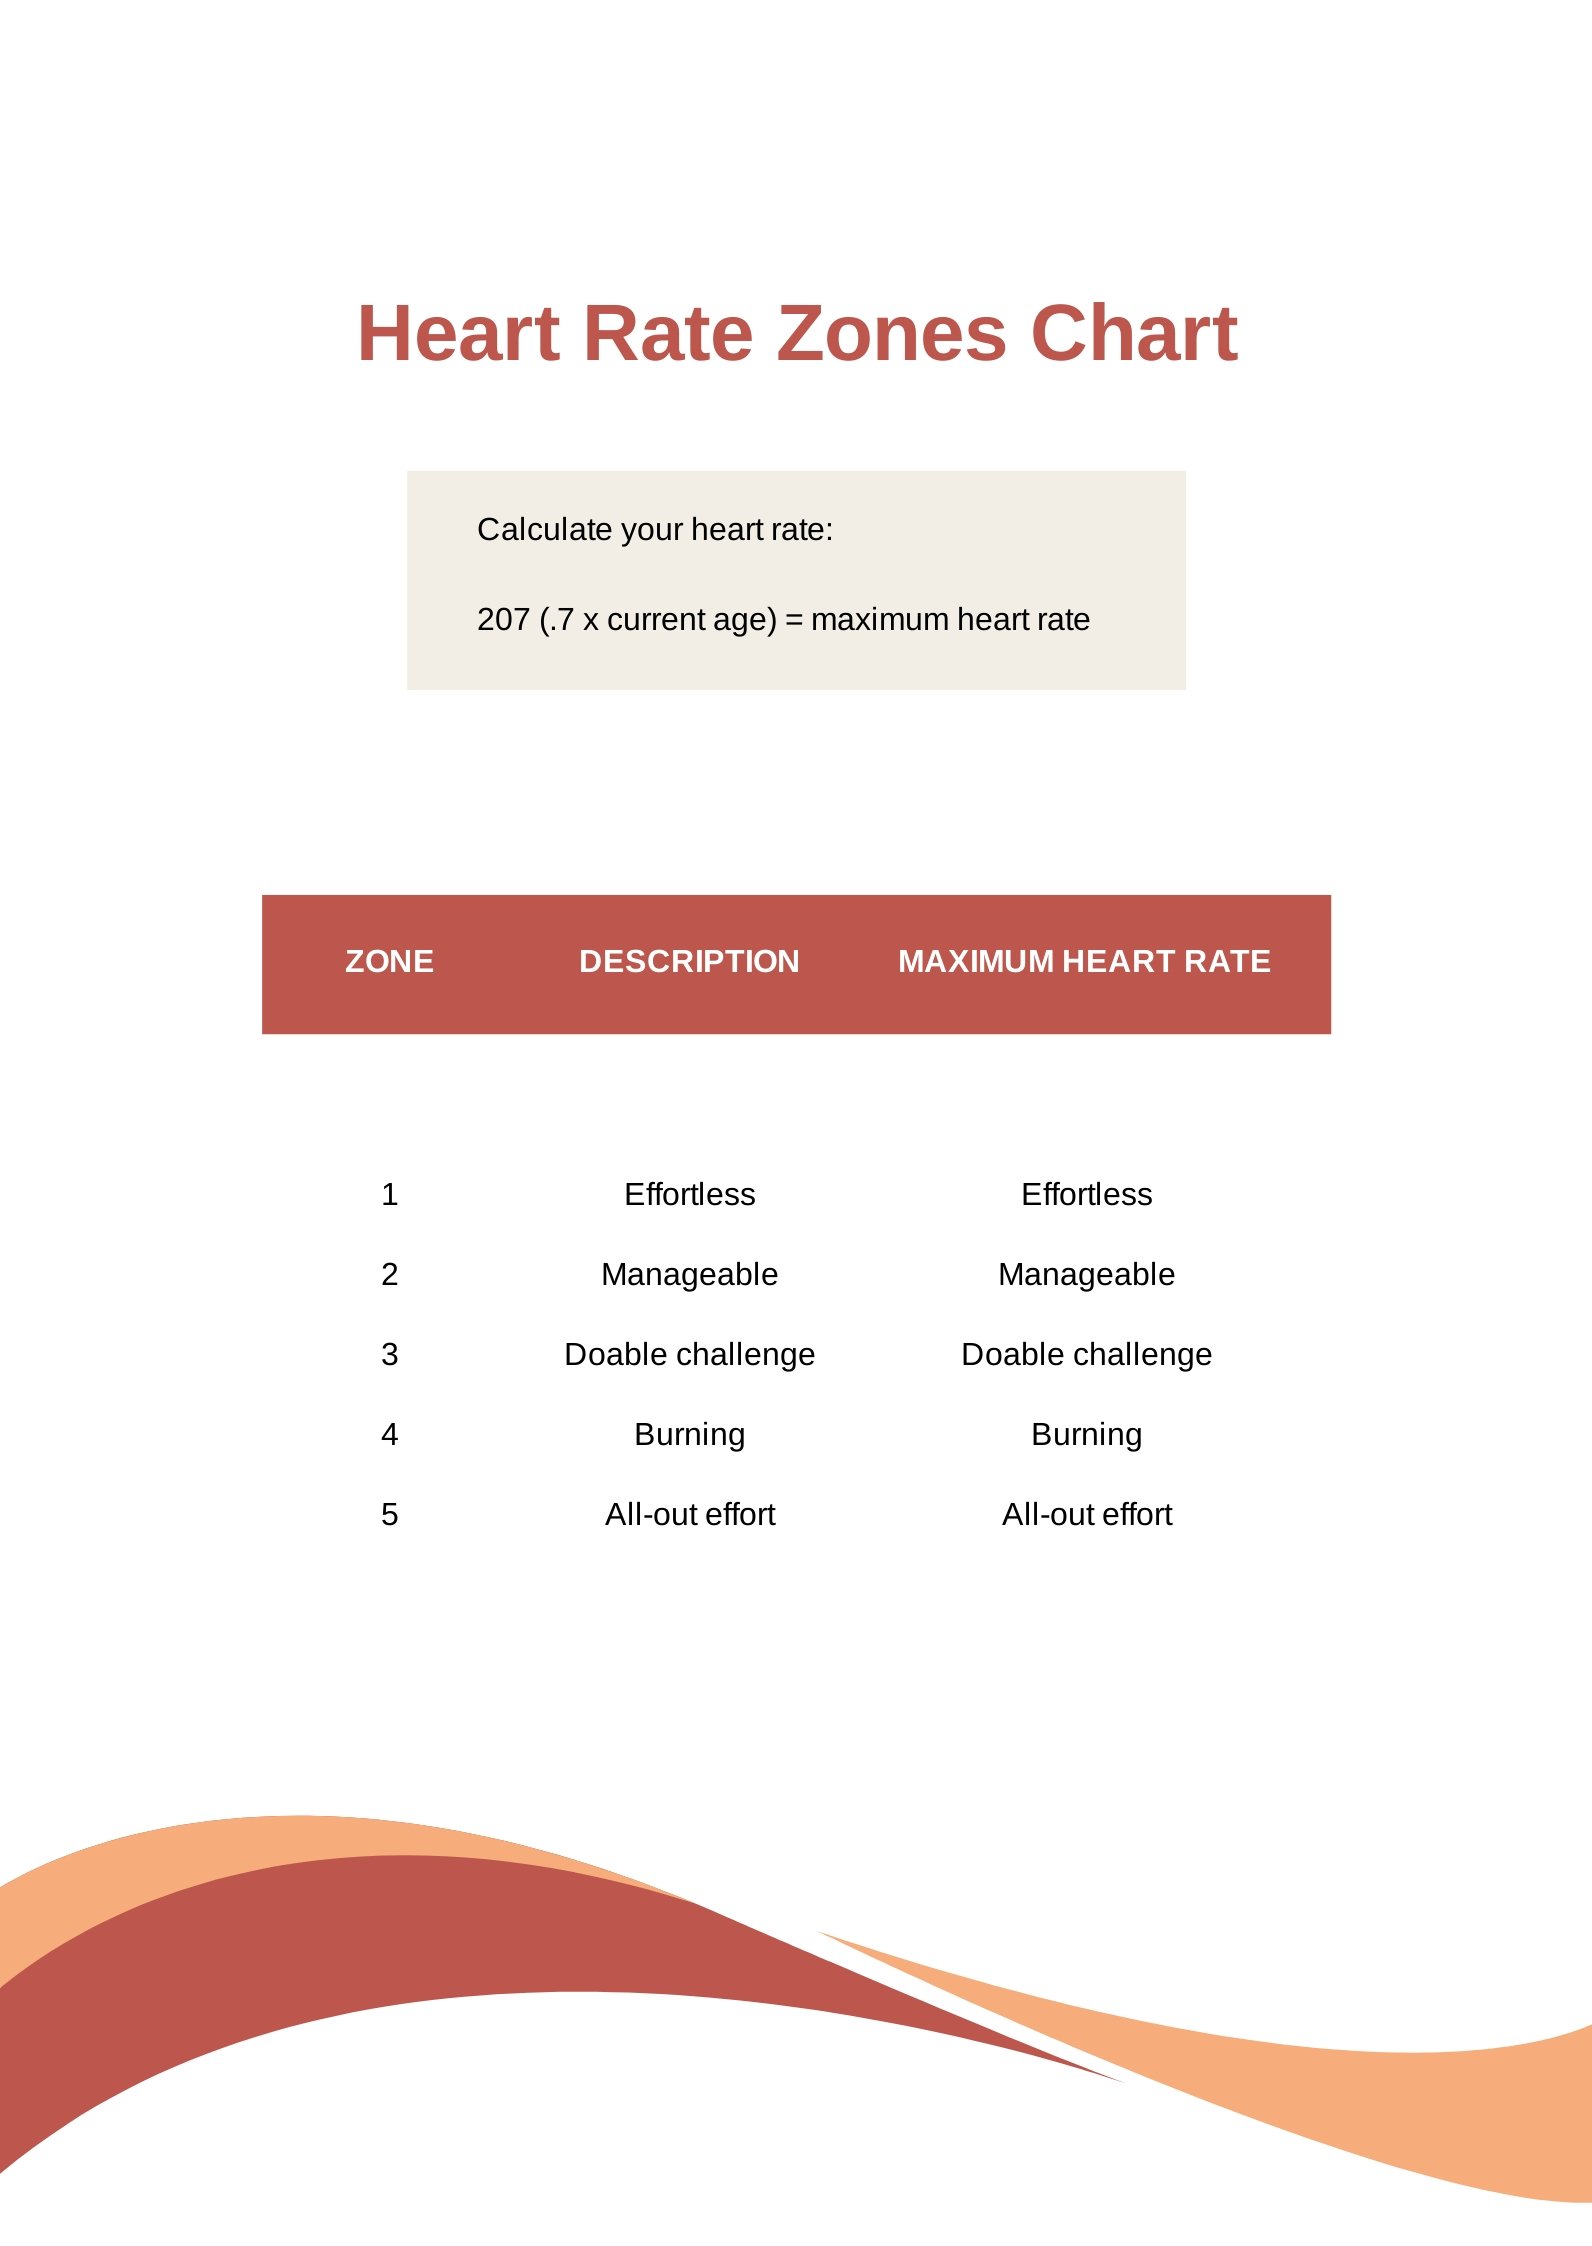 Heart Rate Zones Chart in PDF